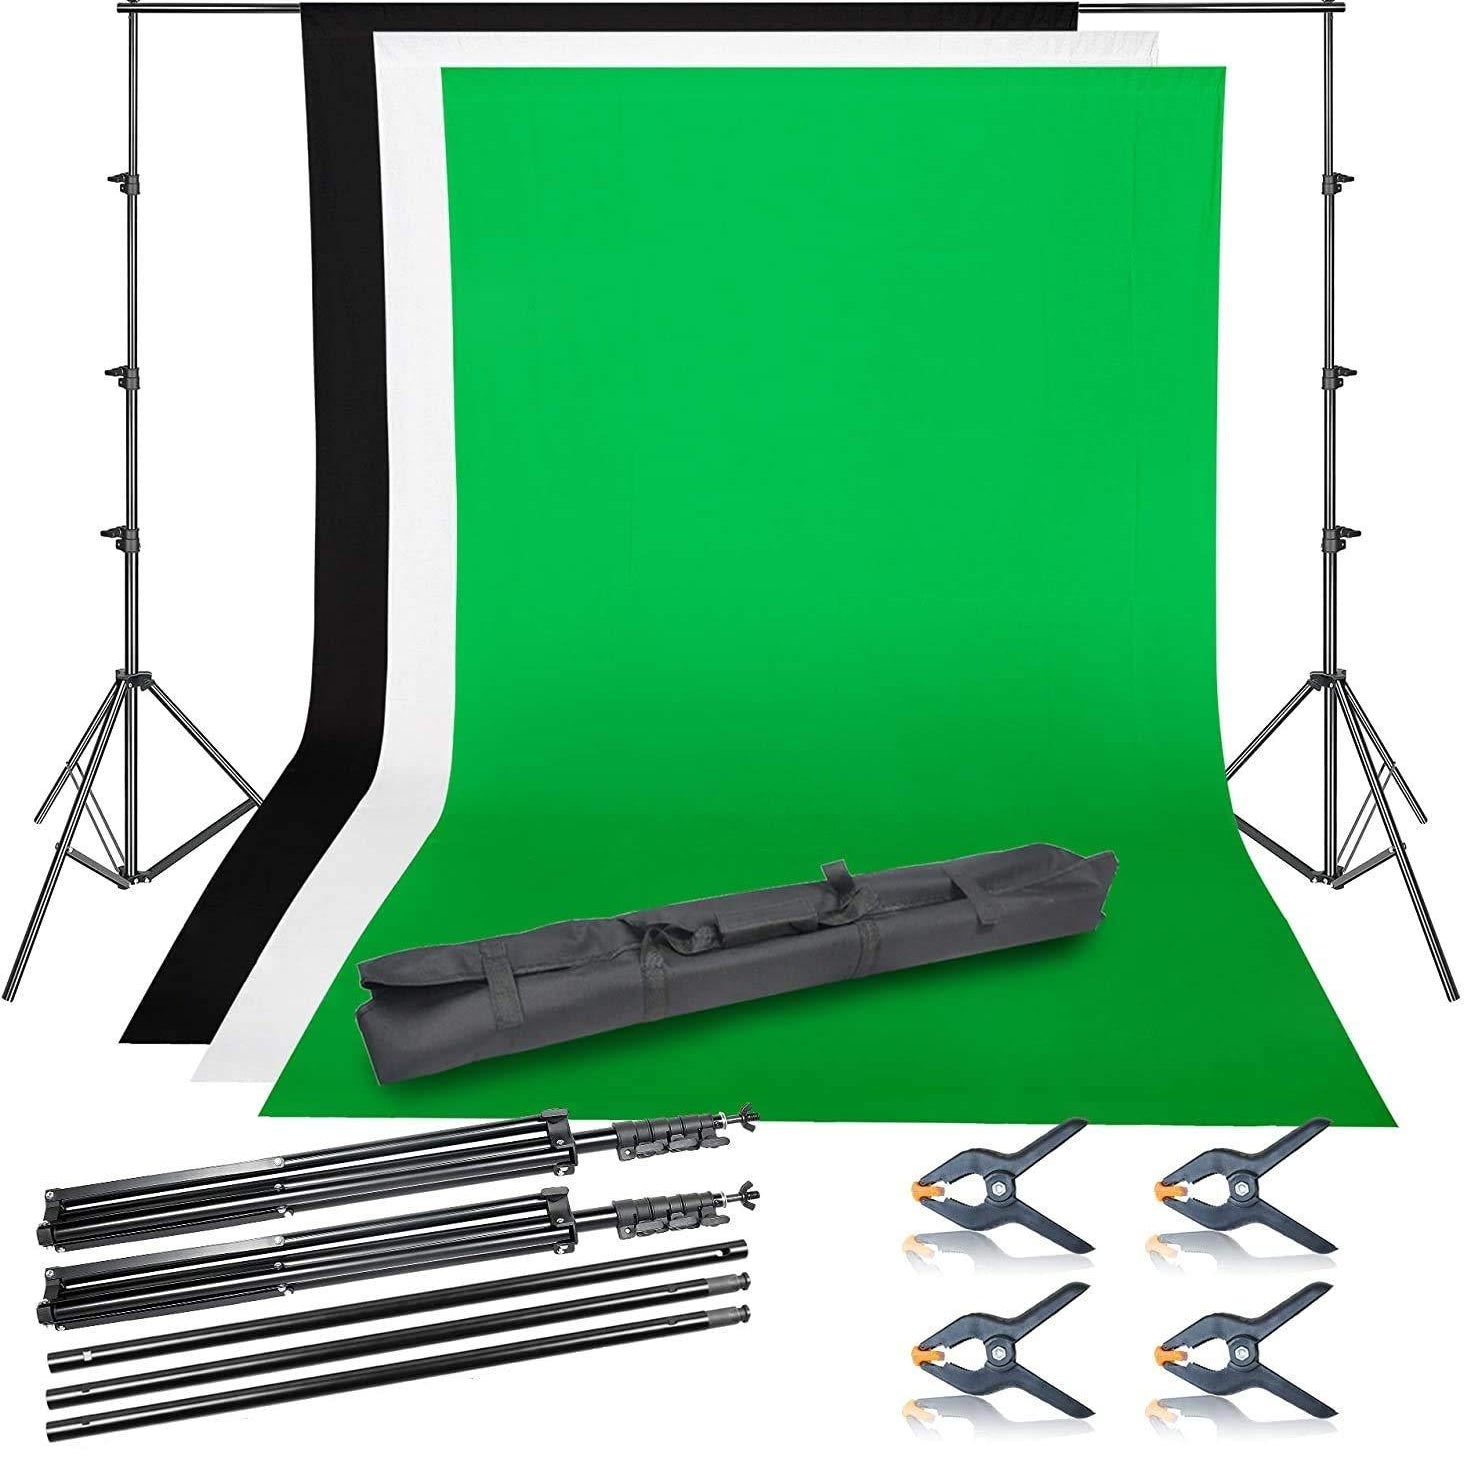 HIFFIN Photo Video Studio Background Backdrop Stand Kit, 8 x 14ft Photography Support System - The Camerashop